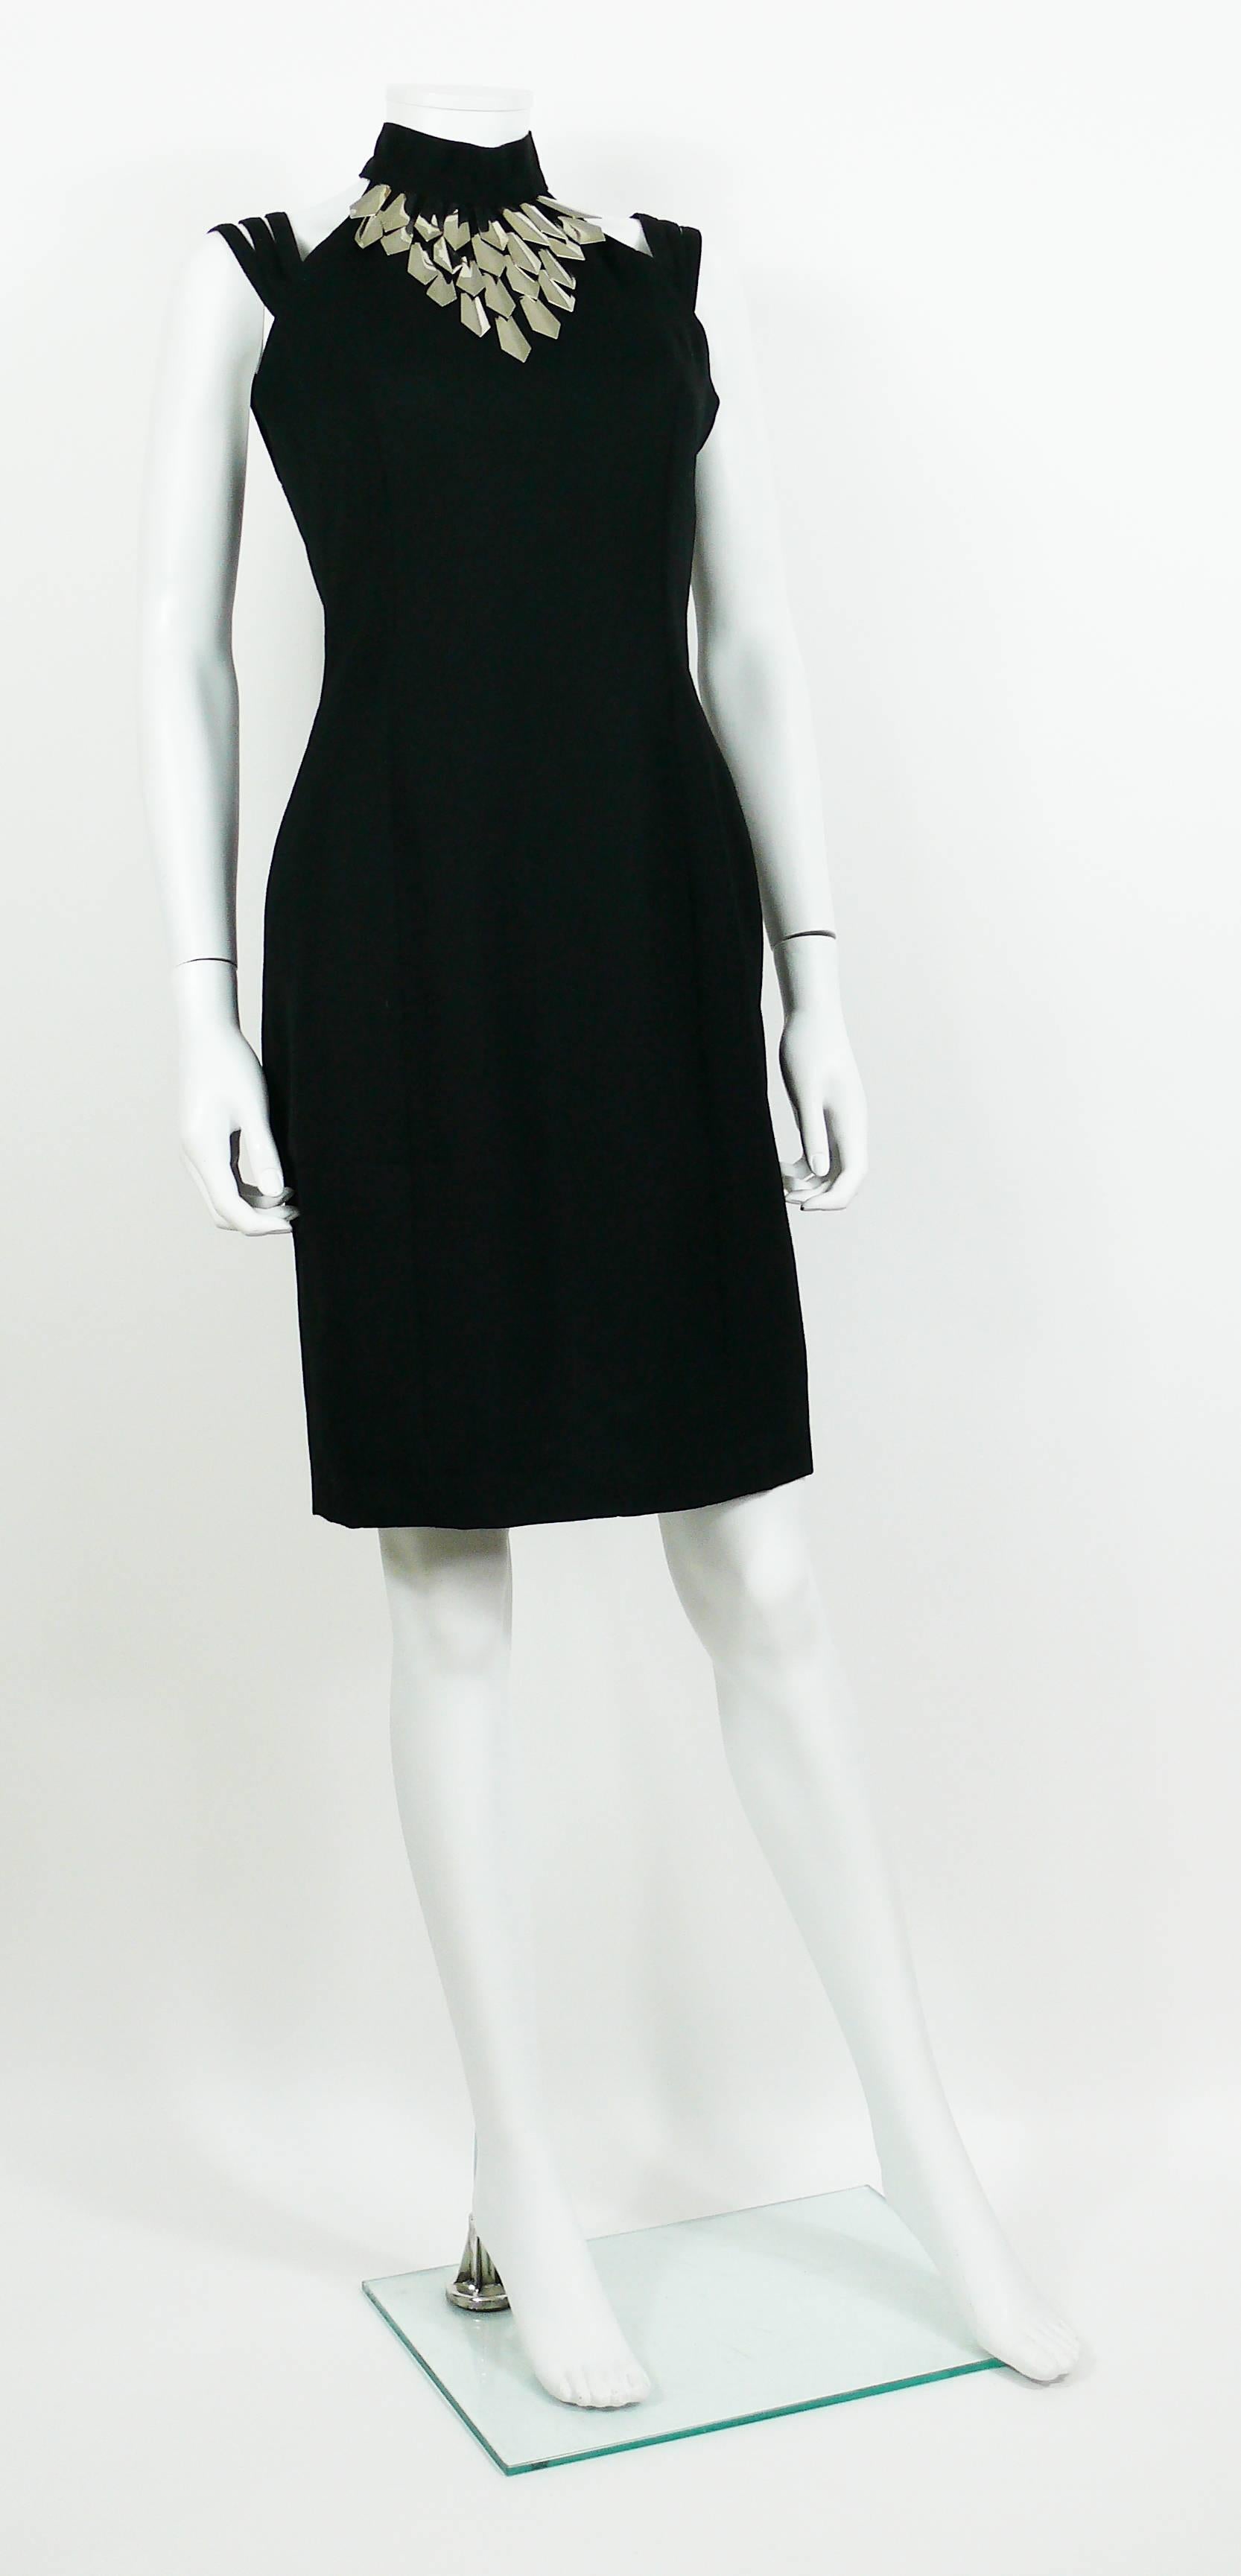 PACO RABANNE vintage black wool halter dress with metal collar.

This dress features :
- Halter neck with back buttoning.
- Metal collar consisting of silver toned 